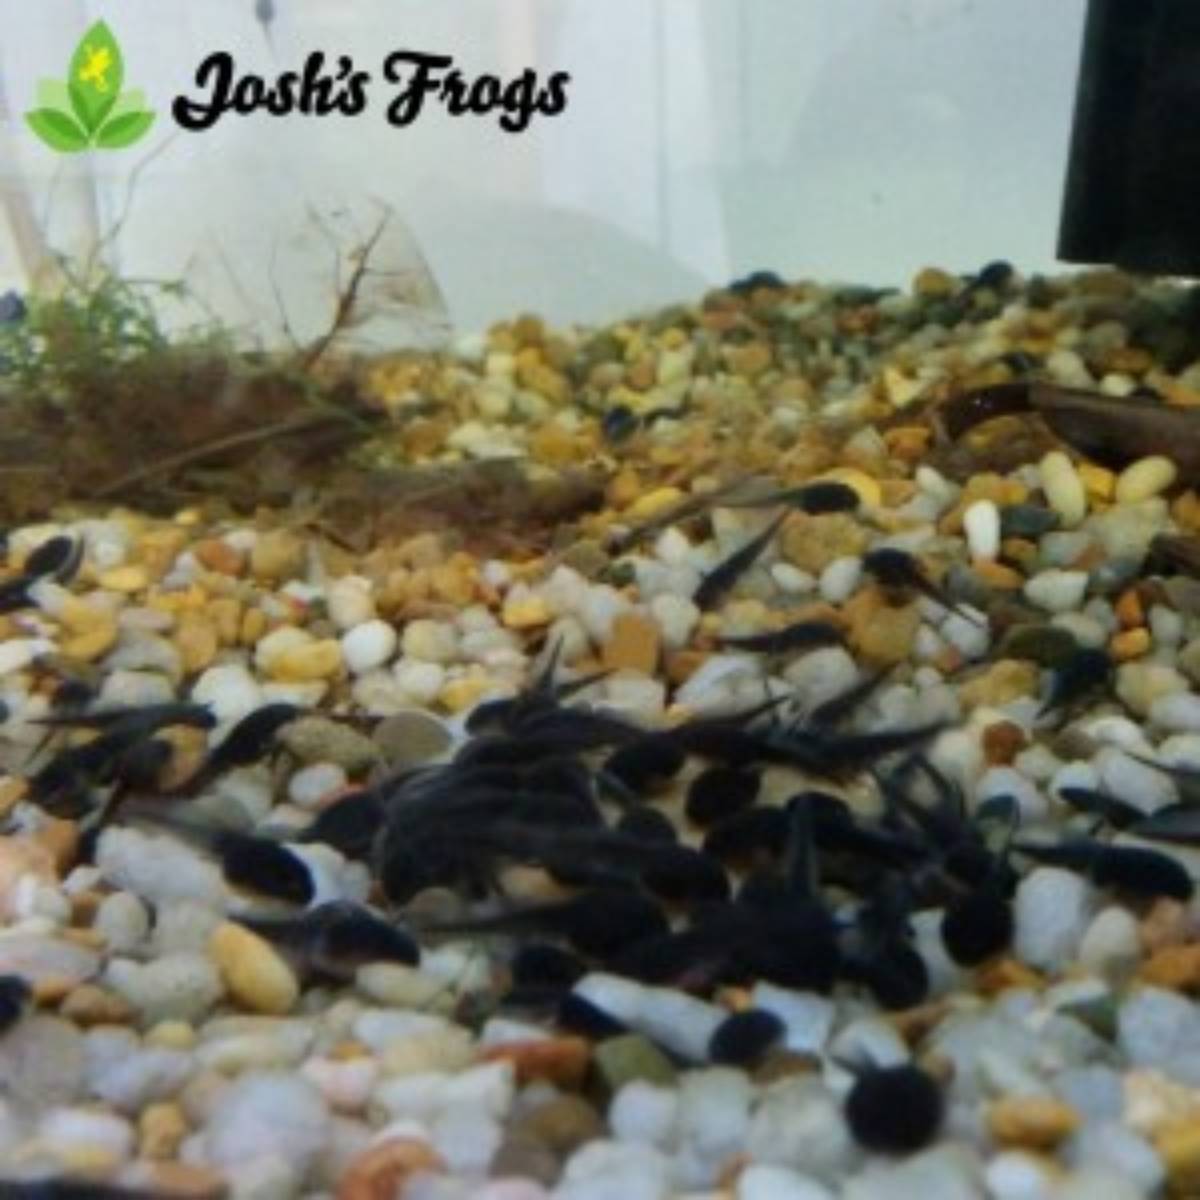 yellow spotted climbing toad captive bred for sale Josh's frogs tank 3